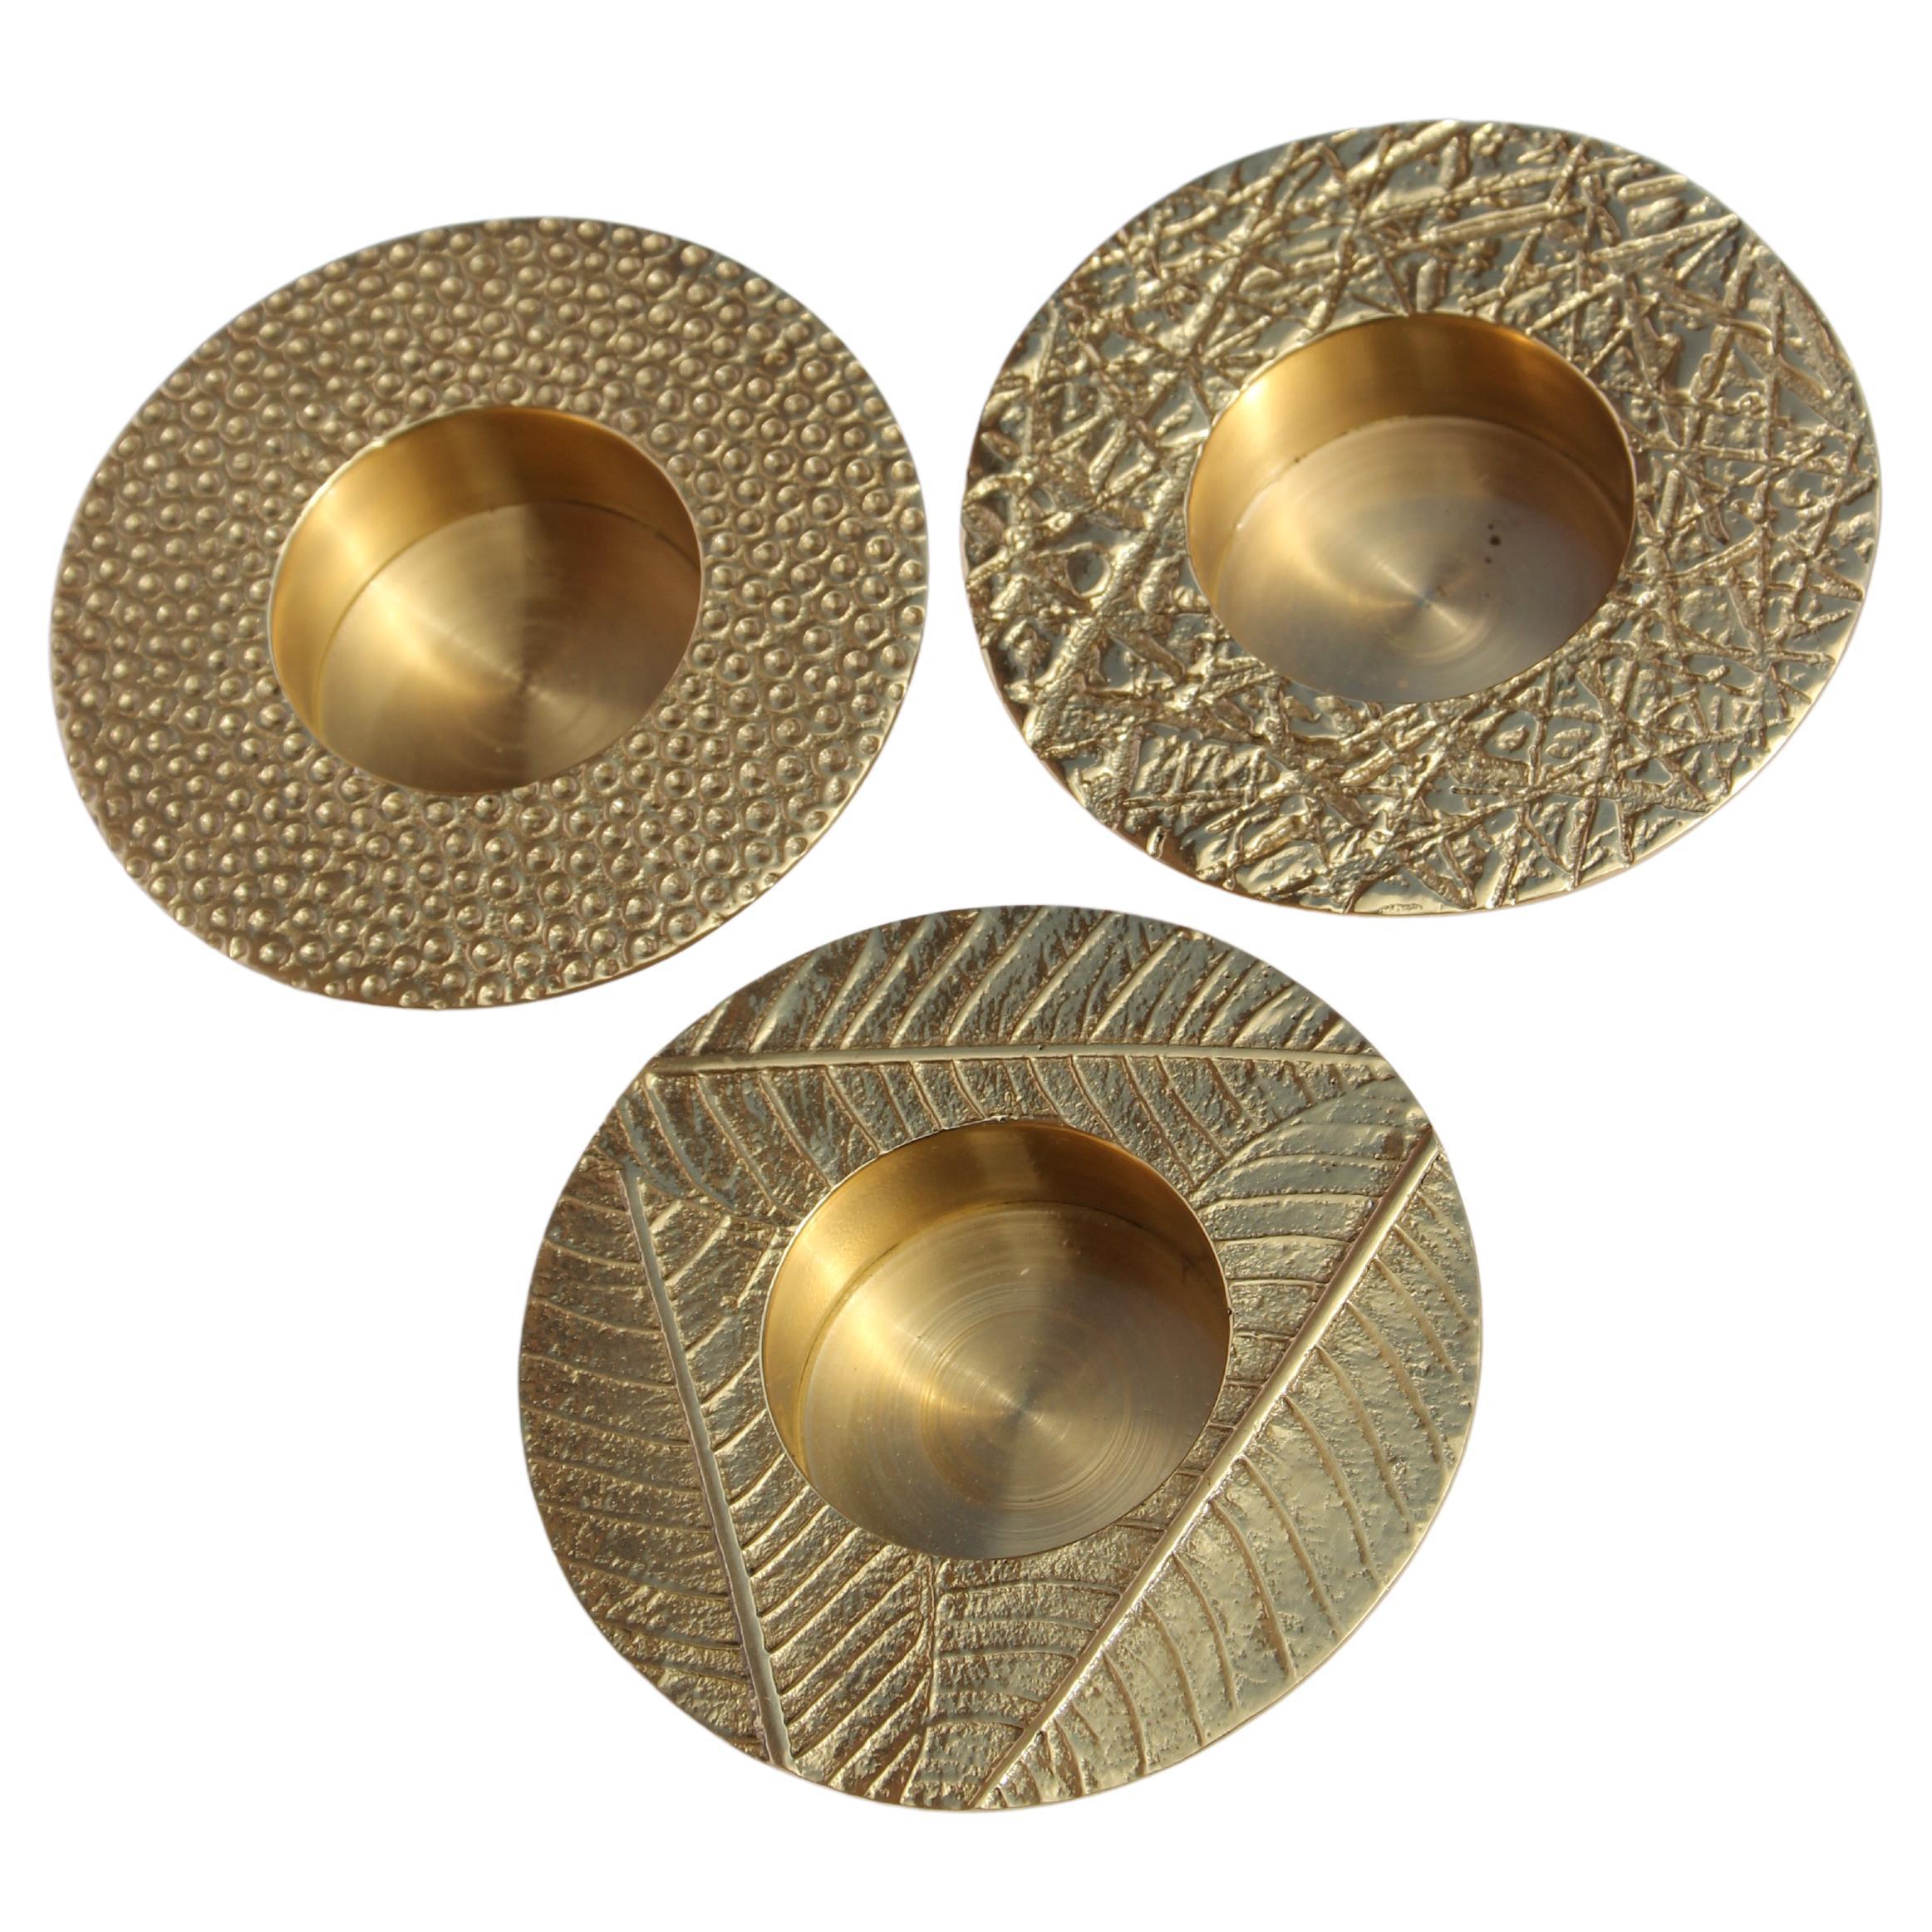 Each of these original brass tealight holders is handmade individually. Cast and textured using very traditional techniques, they are polished revealing the lustrous finish of this beautiful material.

Dimensions: Diameter 8.5 cm x H 2 cm / Diameter